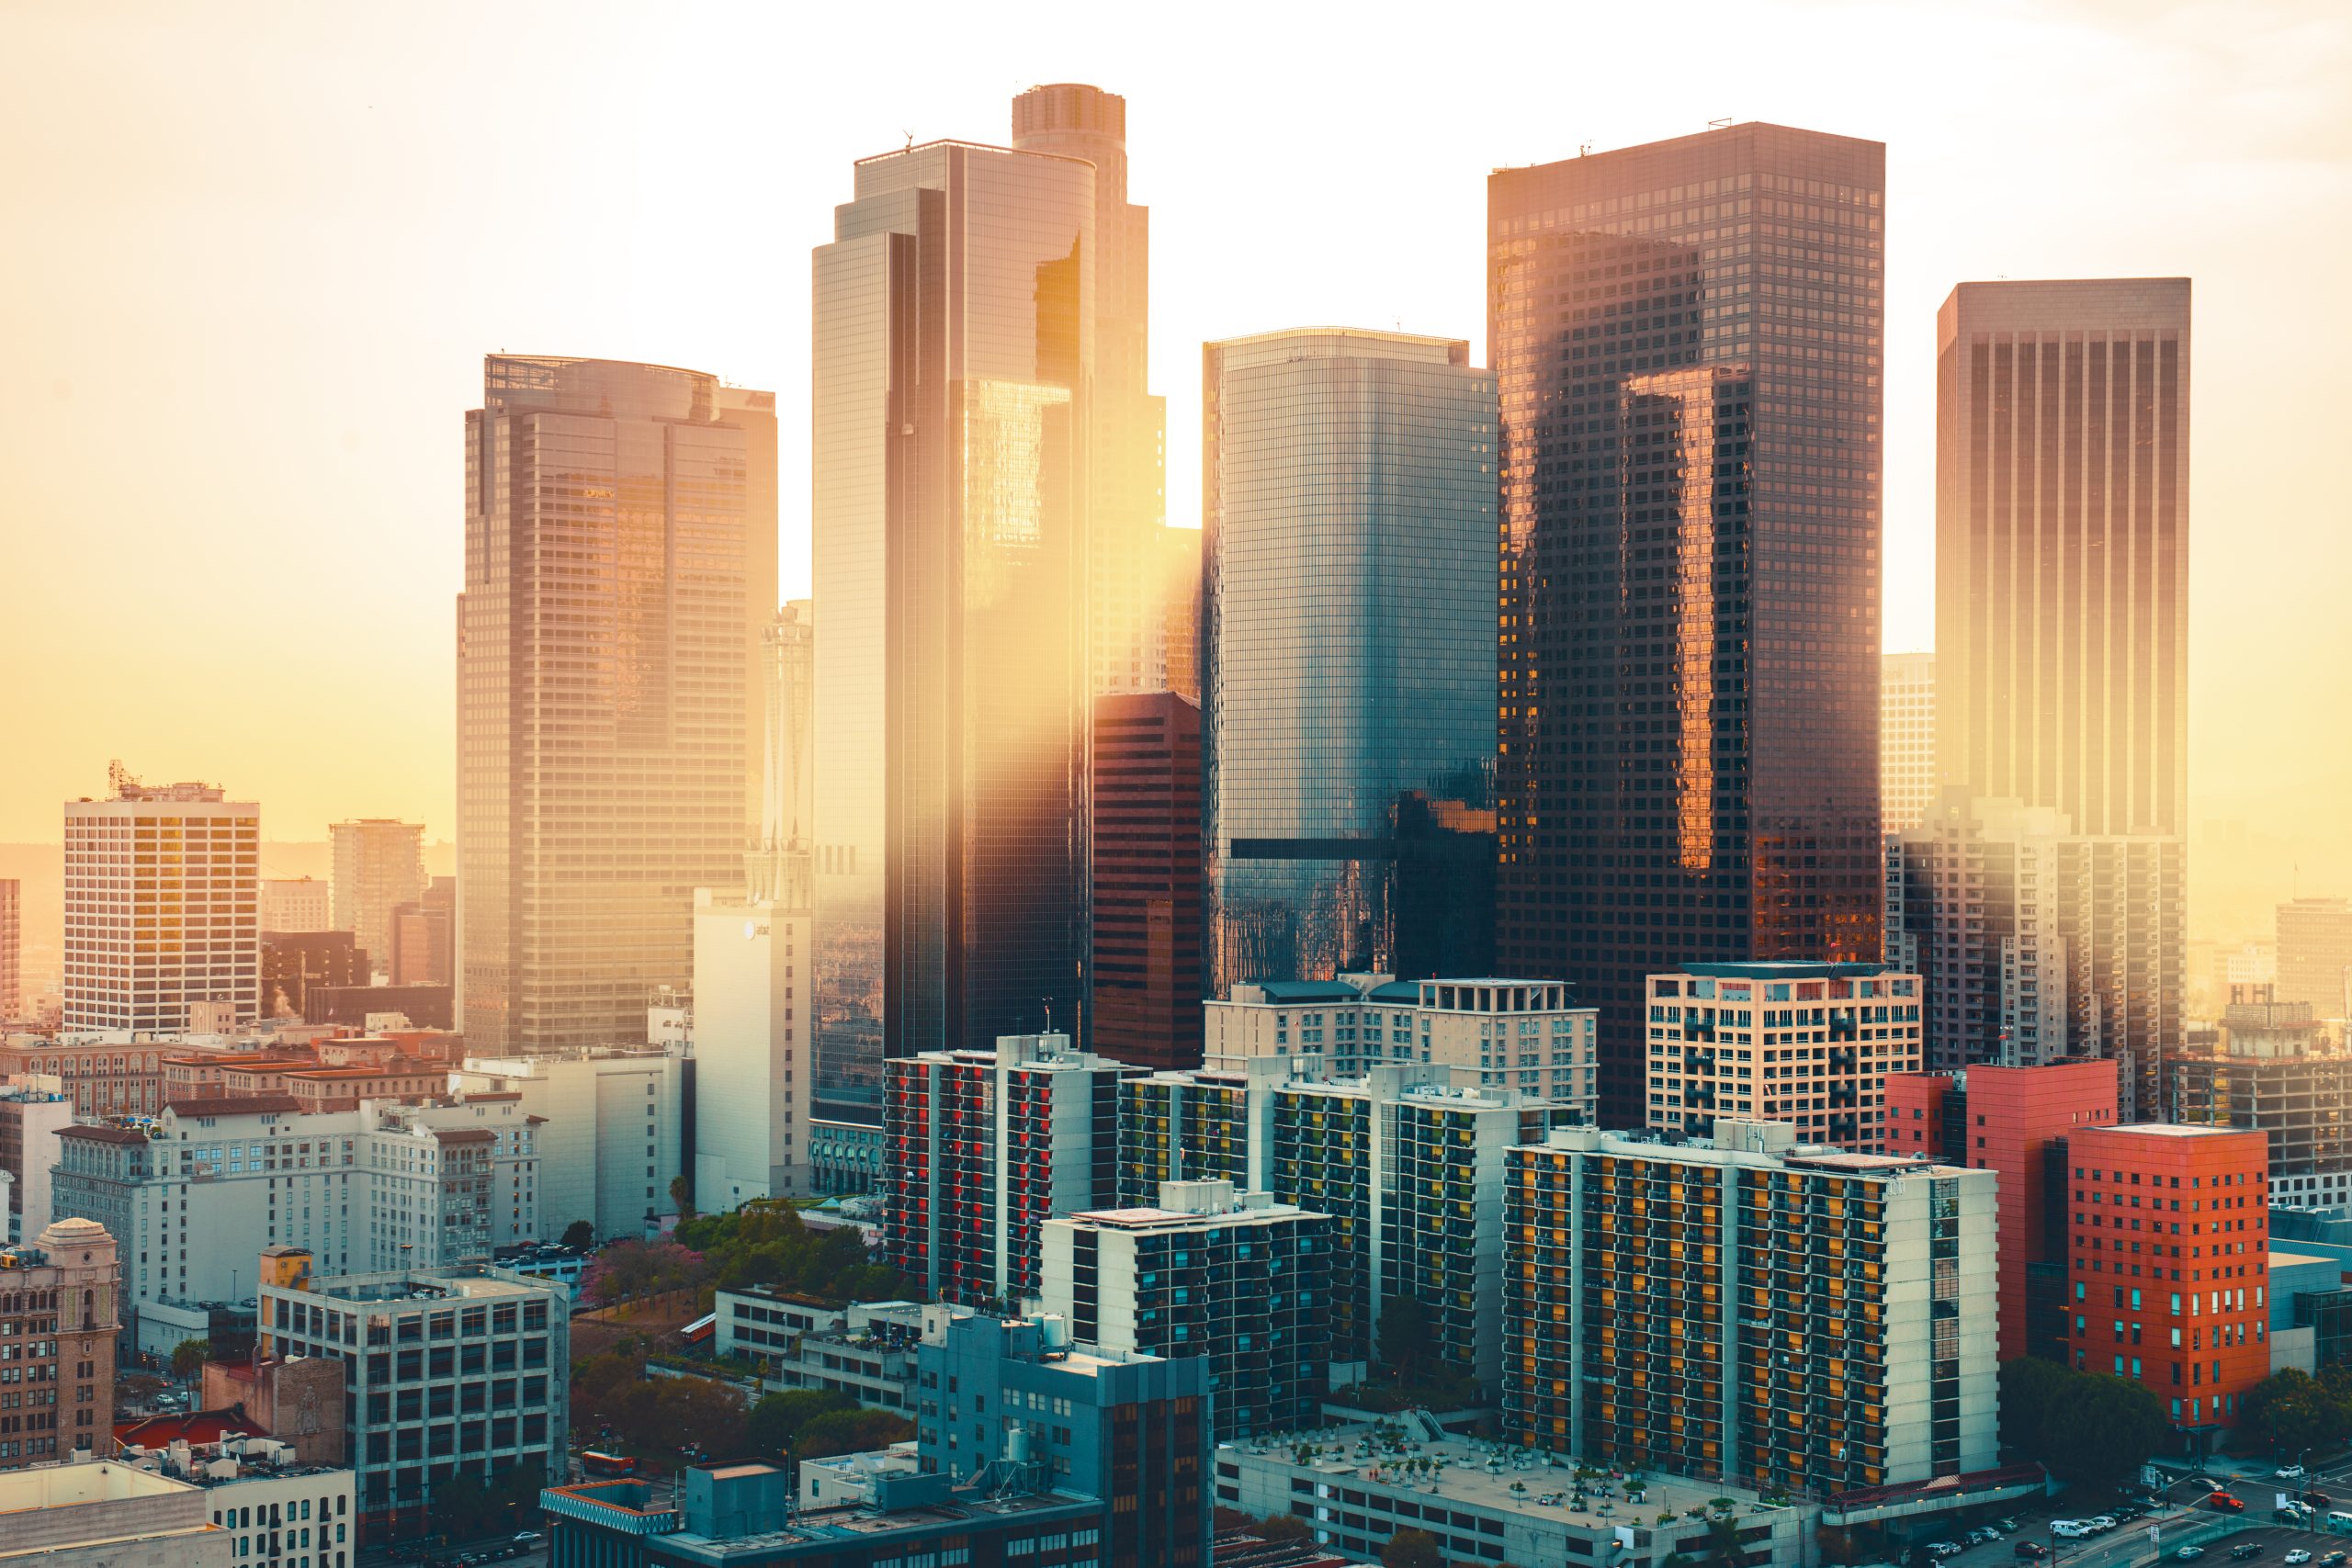 The sun shines through the downtown Los Angeles skyline.